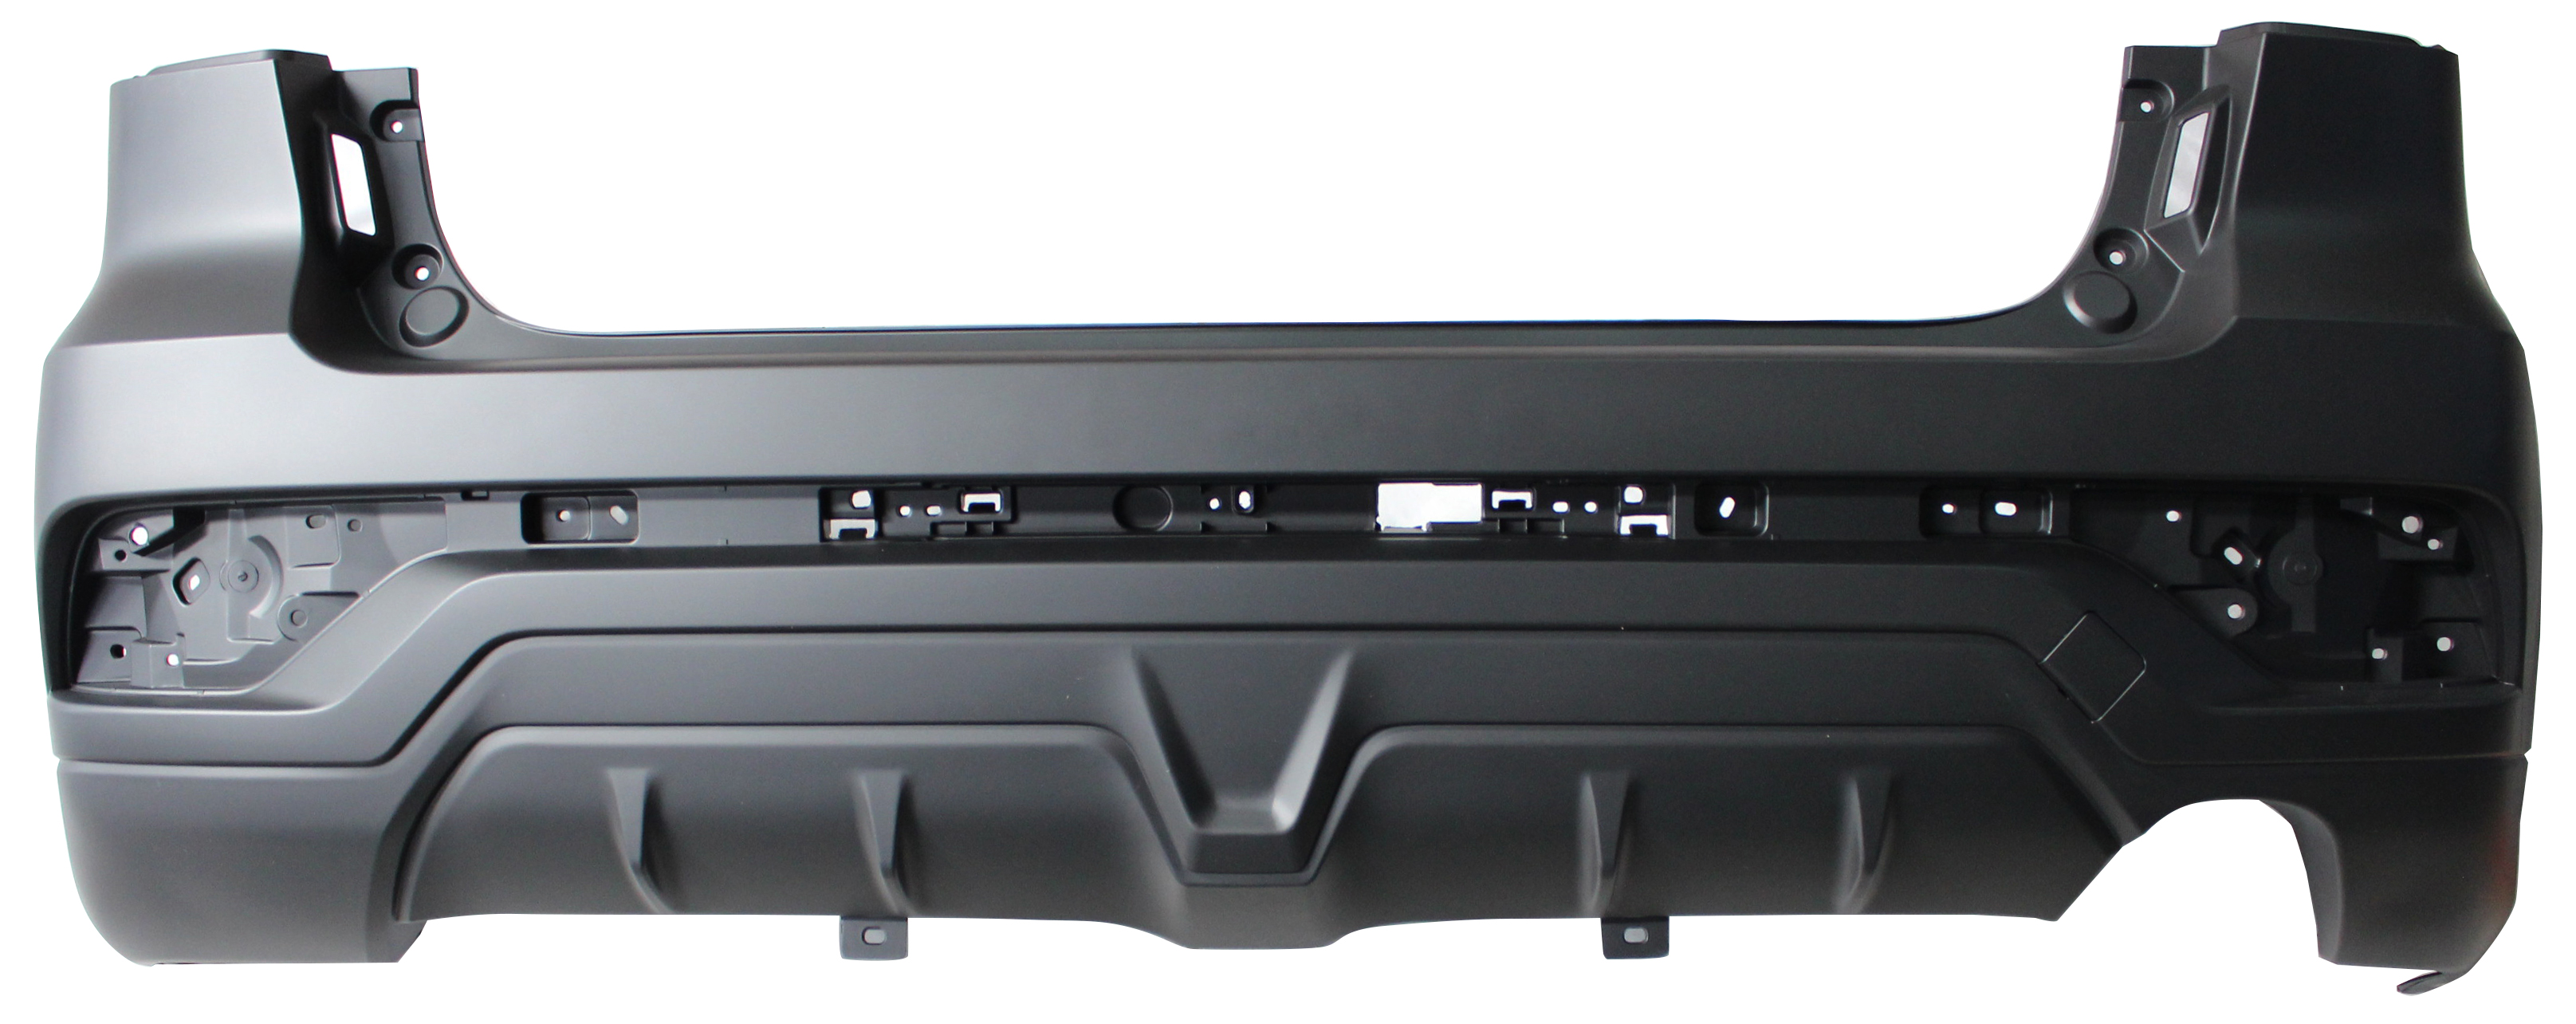 Aftermarket BUMPER COVERS for MITSUBISHI - OUTLANDER SPORT, OUTLANDER SPORT,18-19,Rear bumper cover